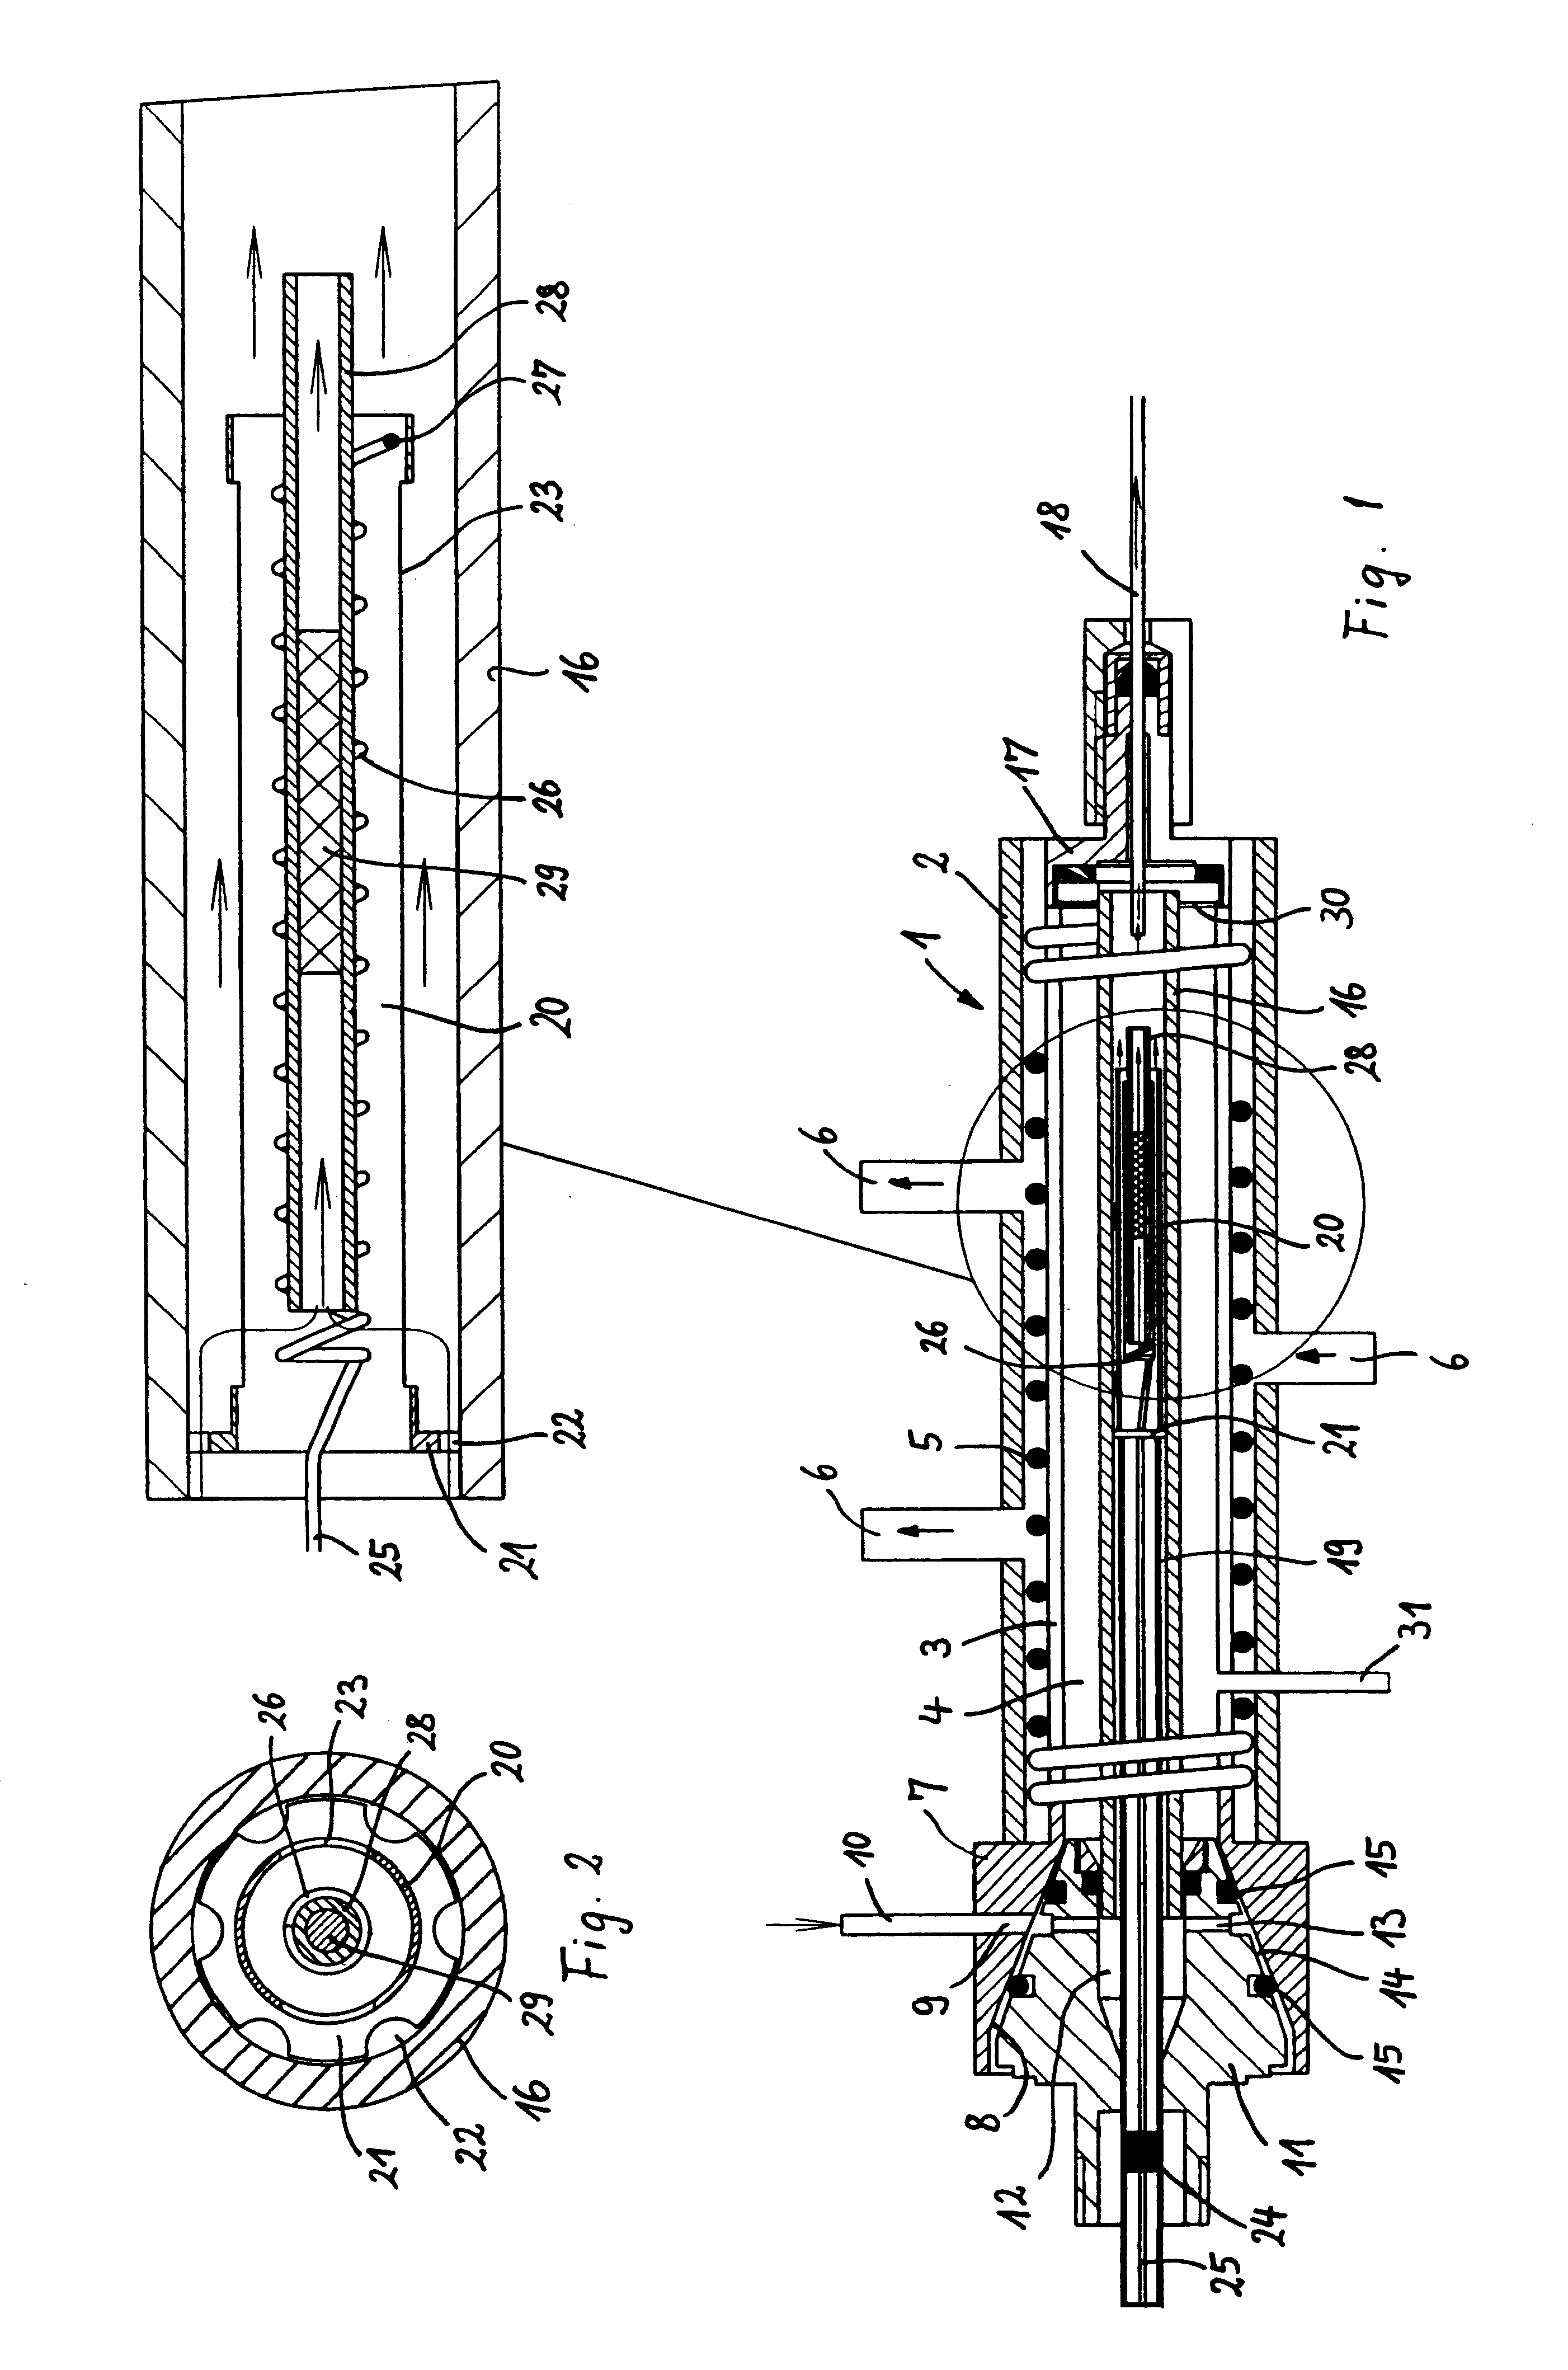 Sample application device for a gas chromatograph